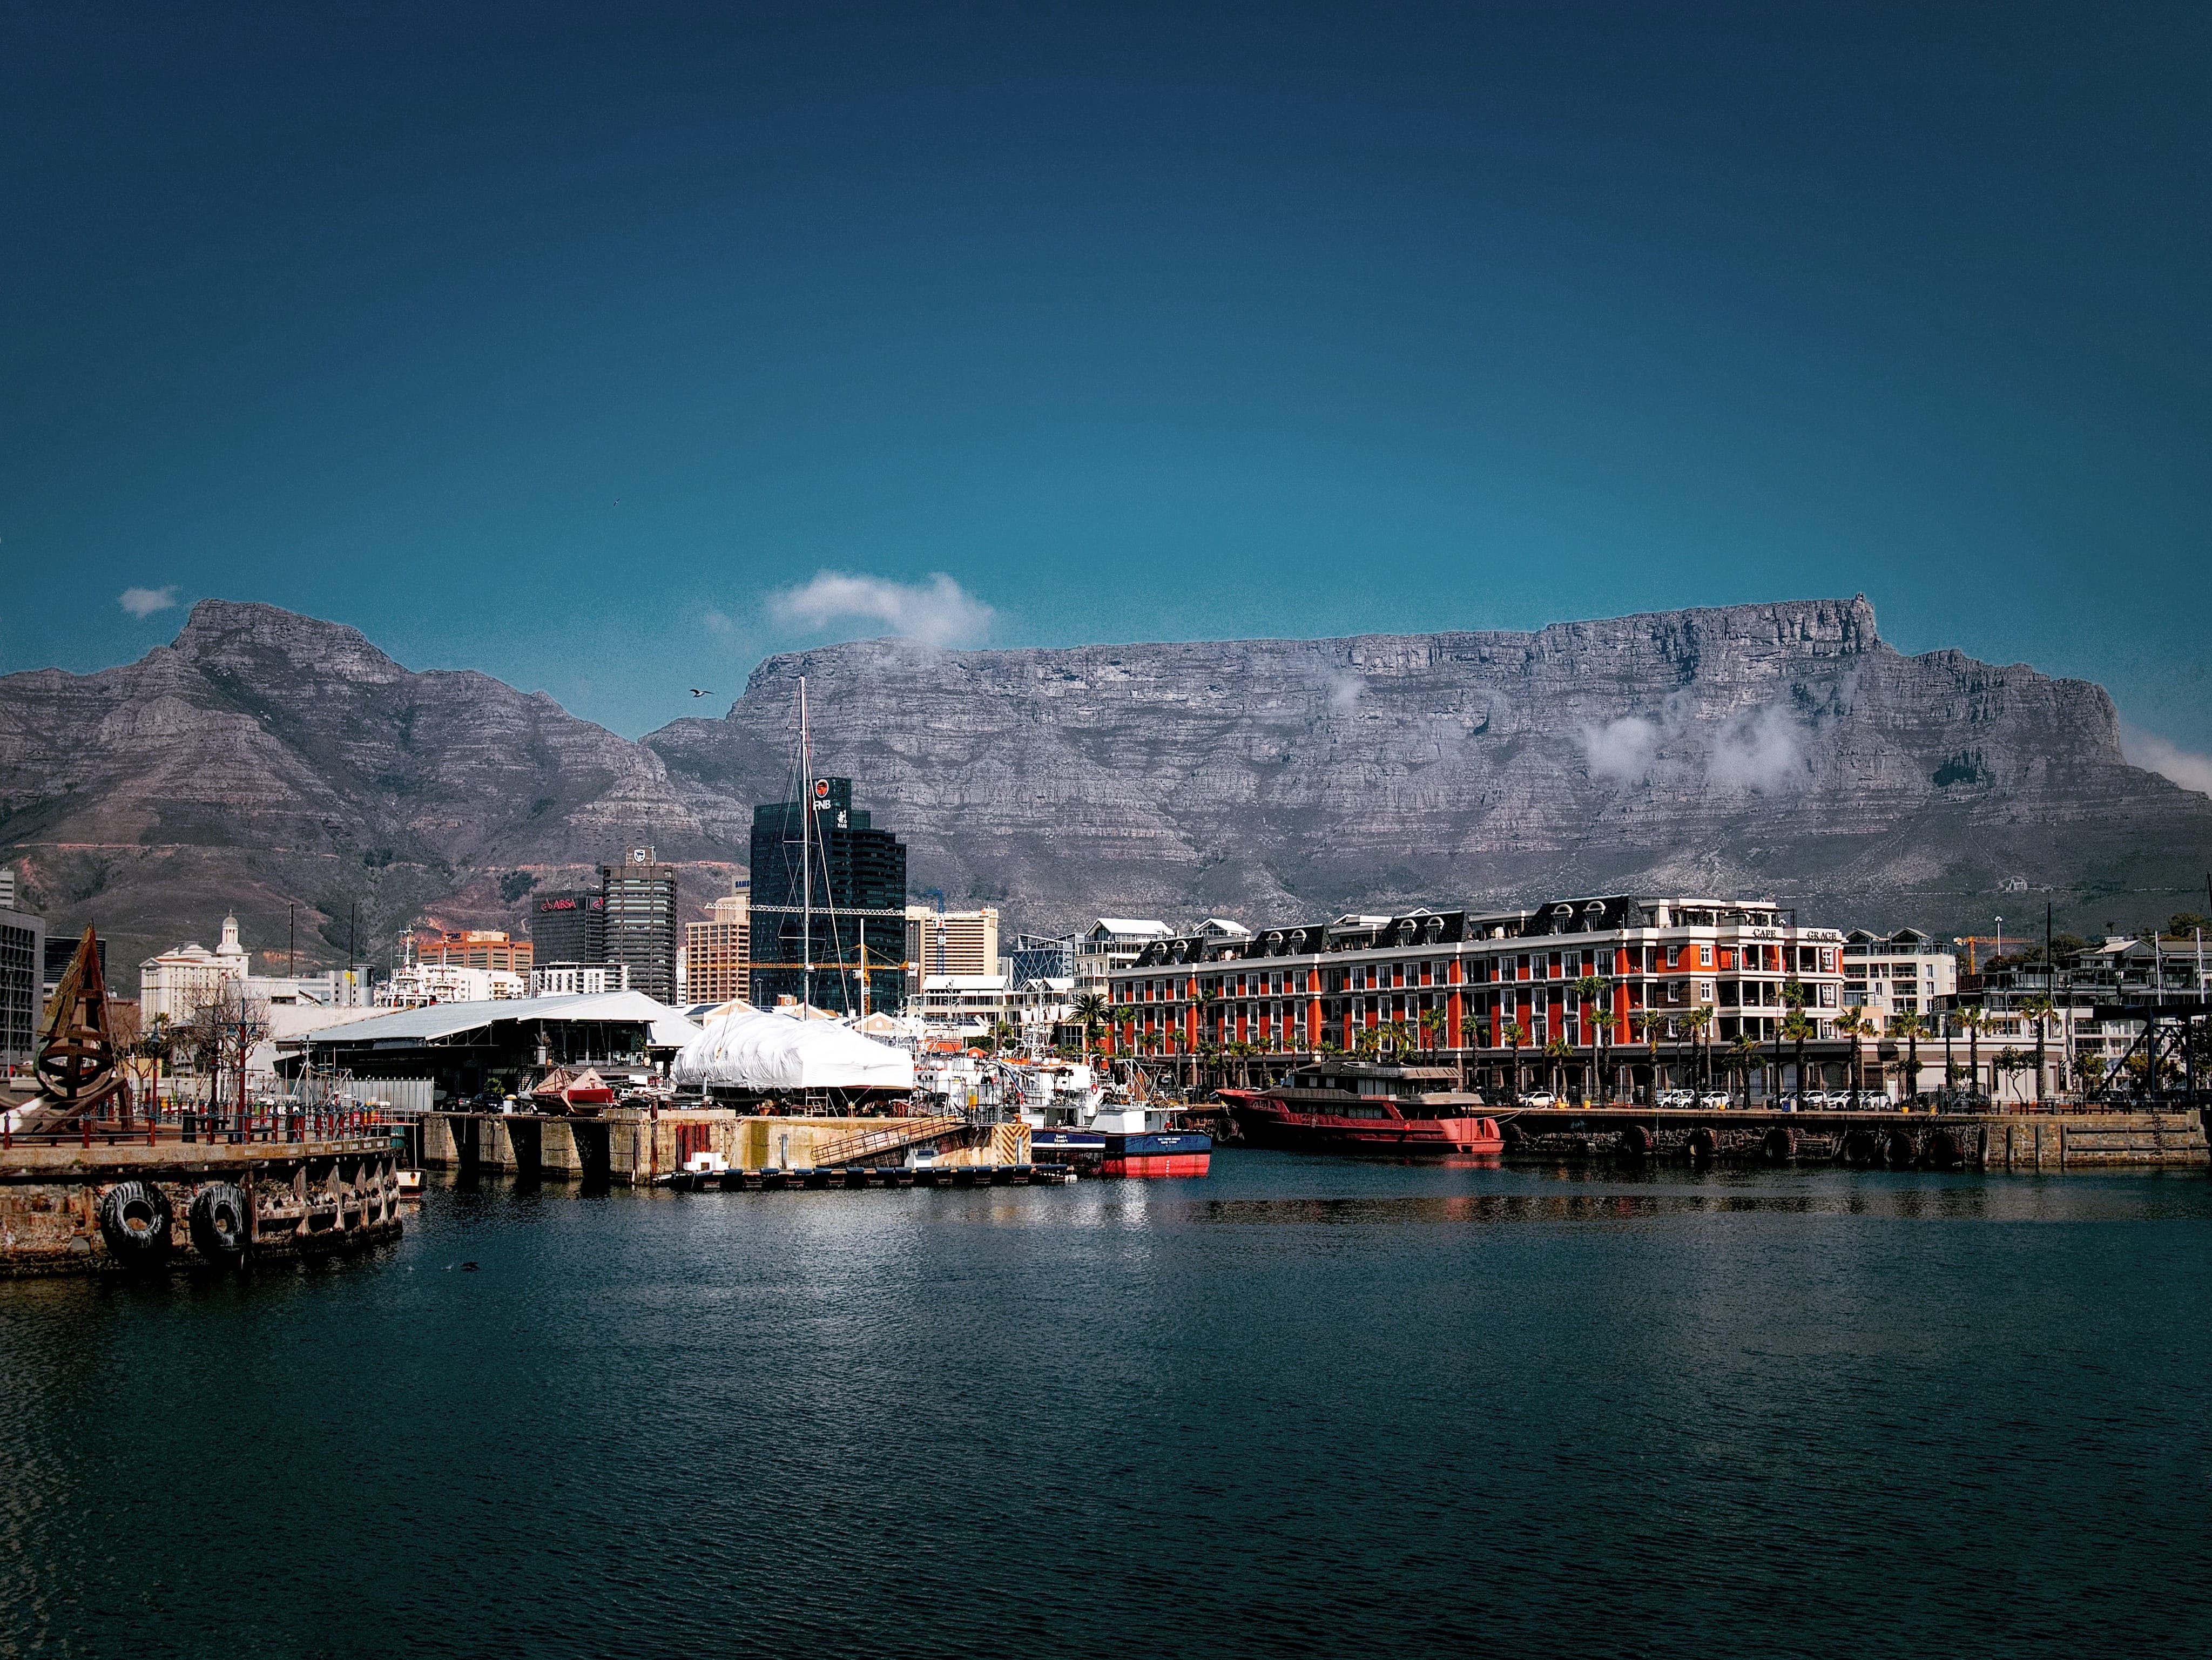 Victoria and alfred waterfront in Cape Town with a view of table mountain.